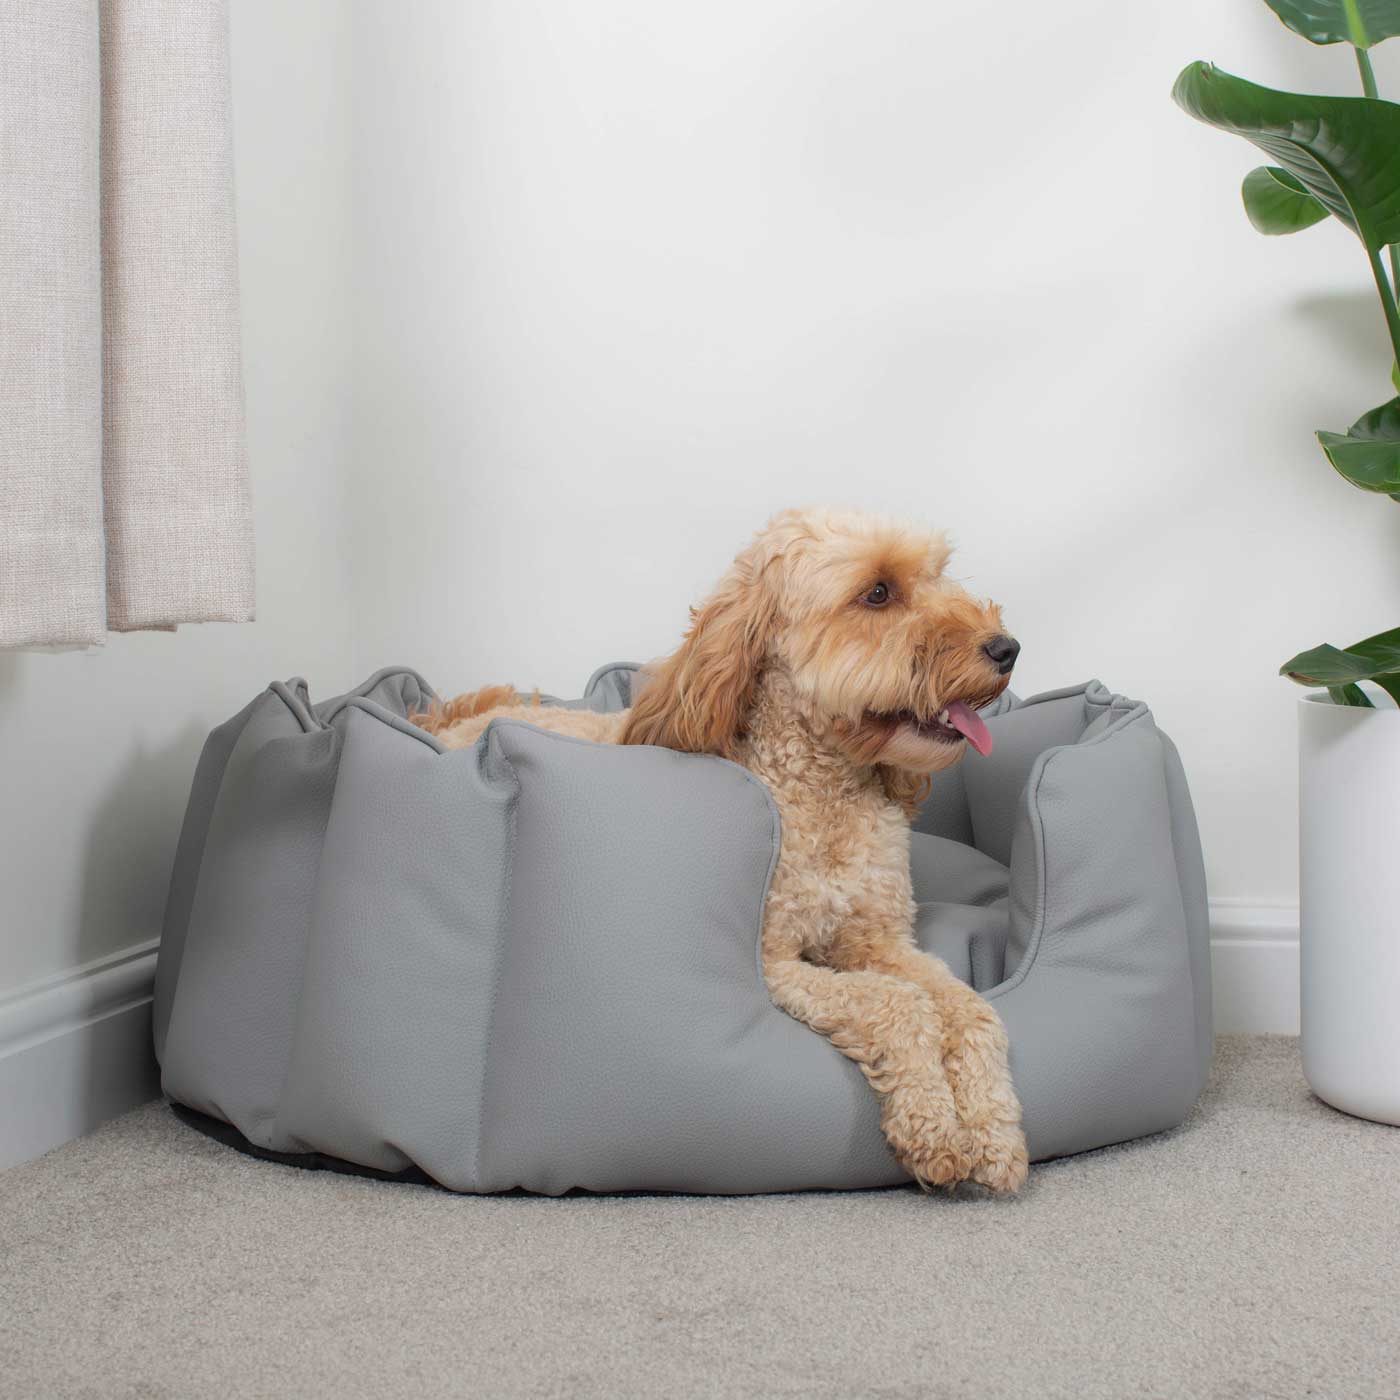 [colour:granite] Luxury Handmade High Wall in Rhino Tough Faux Leather, in Granite, Perfect For Your Pets Nap Time! Available To Personalise at Lords & Labradors